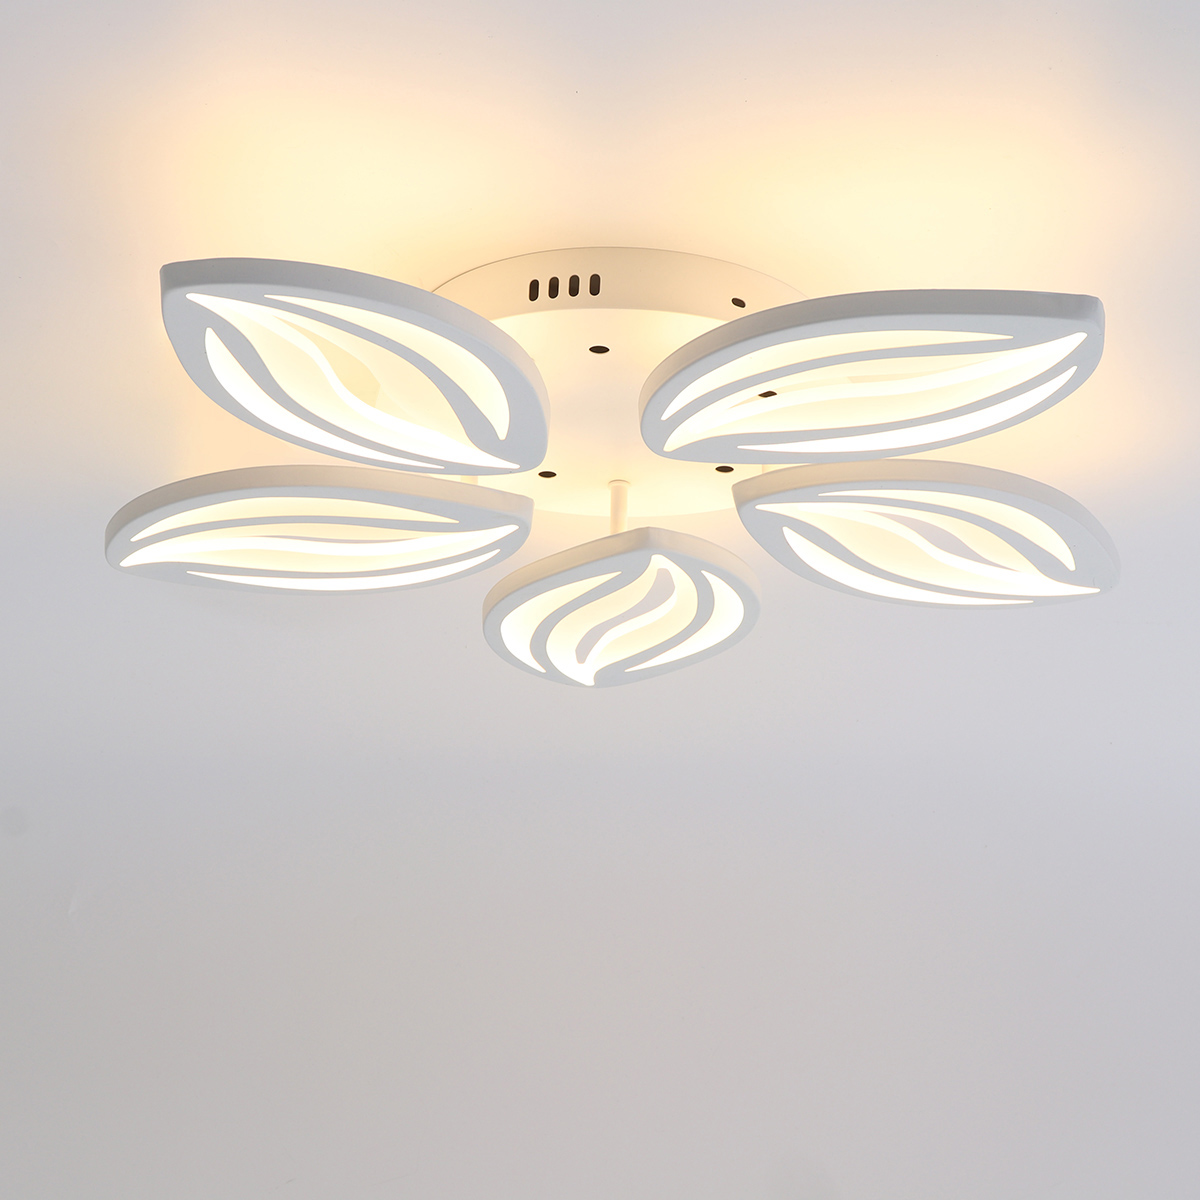 AC110-220V-6000LM-550LED-Ceiling-Light-Fixture-Lamp-Remote-Control-Bedroom-Study-Parlor-1807229-12